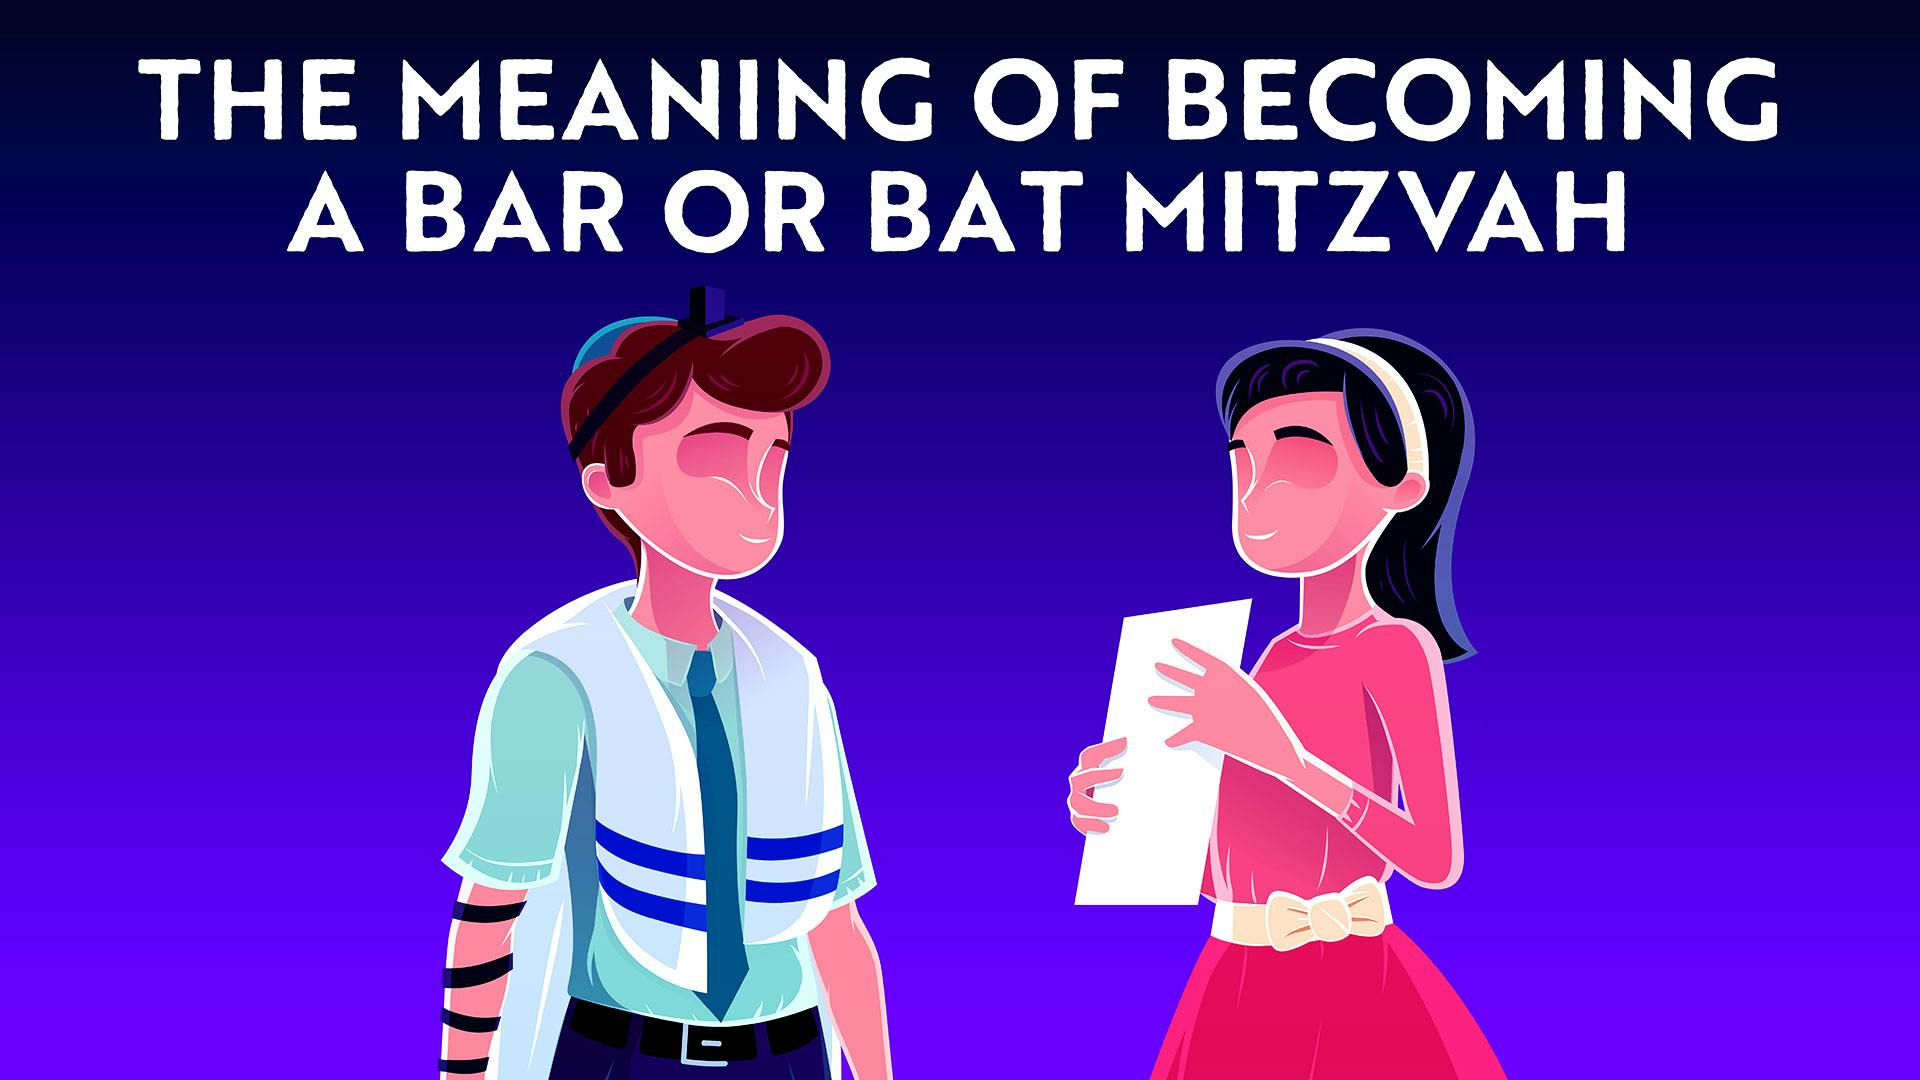 The Meaning of Becoming a Bar or Bat Mitzvah